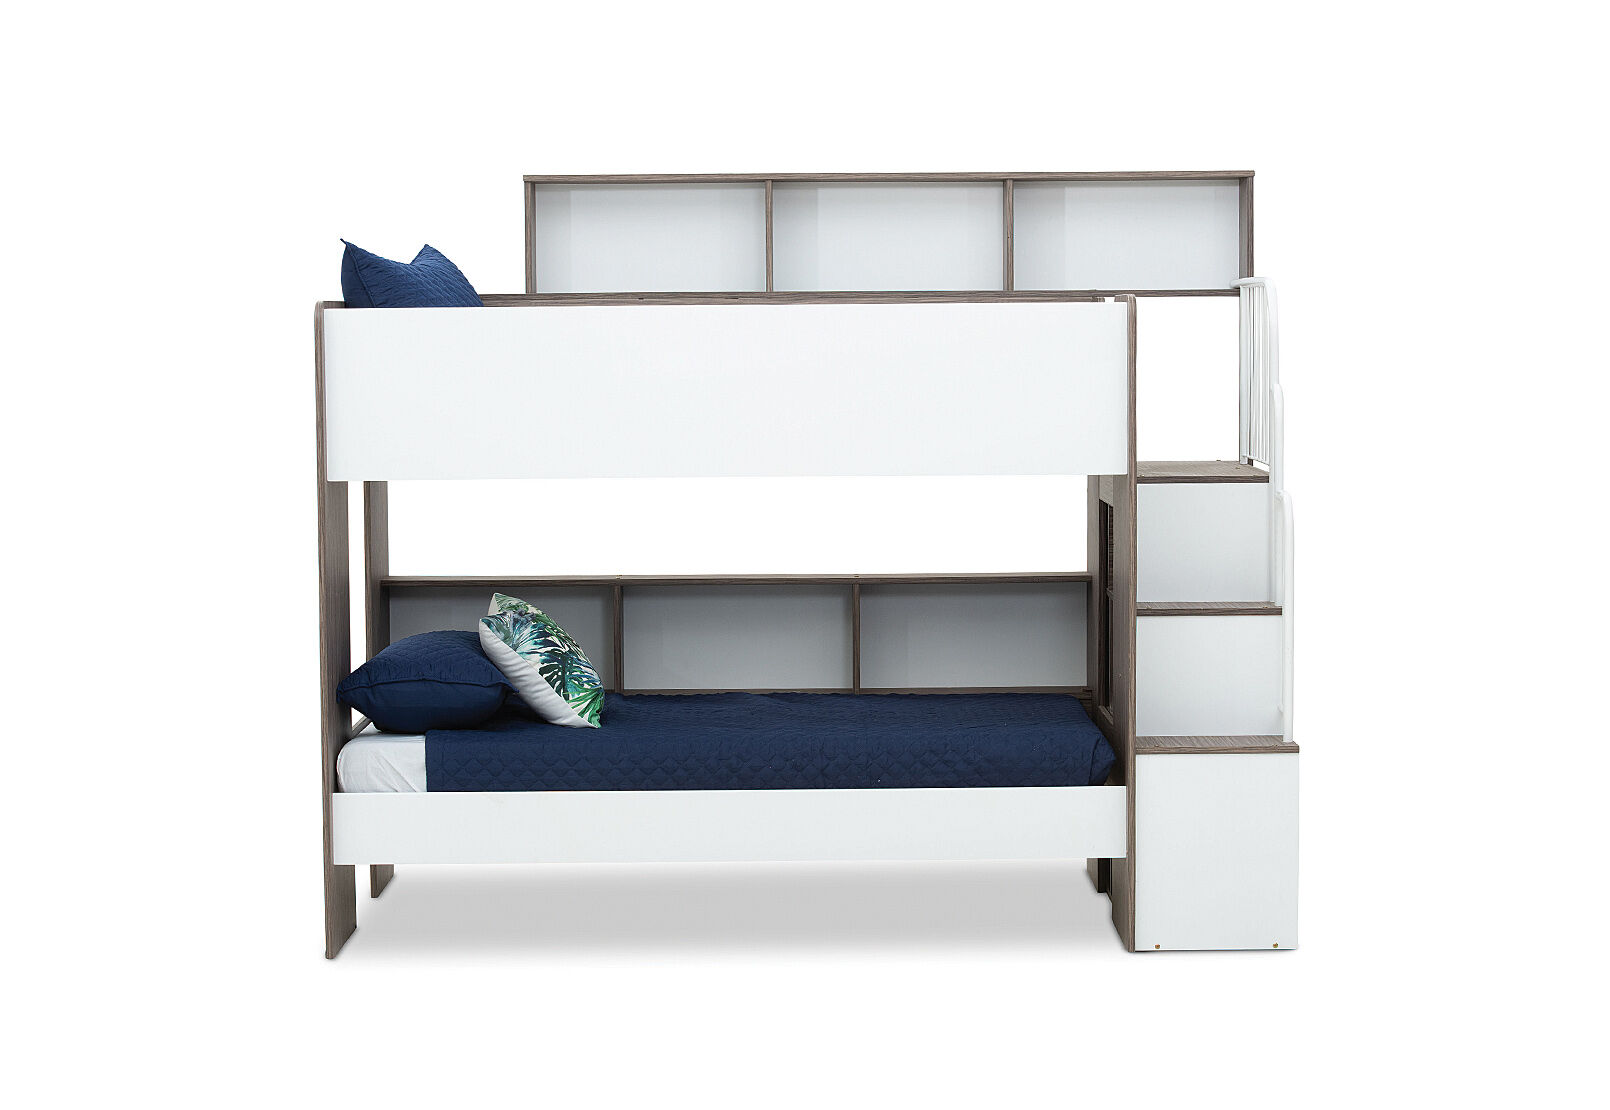 White Tango Jason Mk2 Double Bunk Bed, Jaysom Bunk Bed